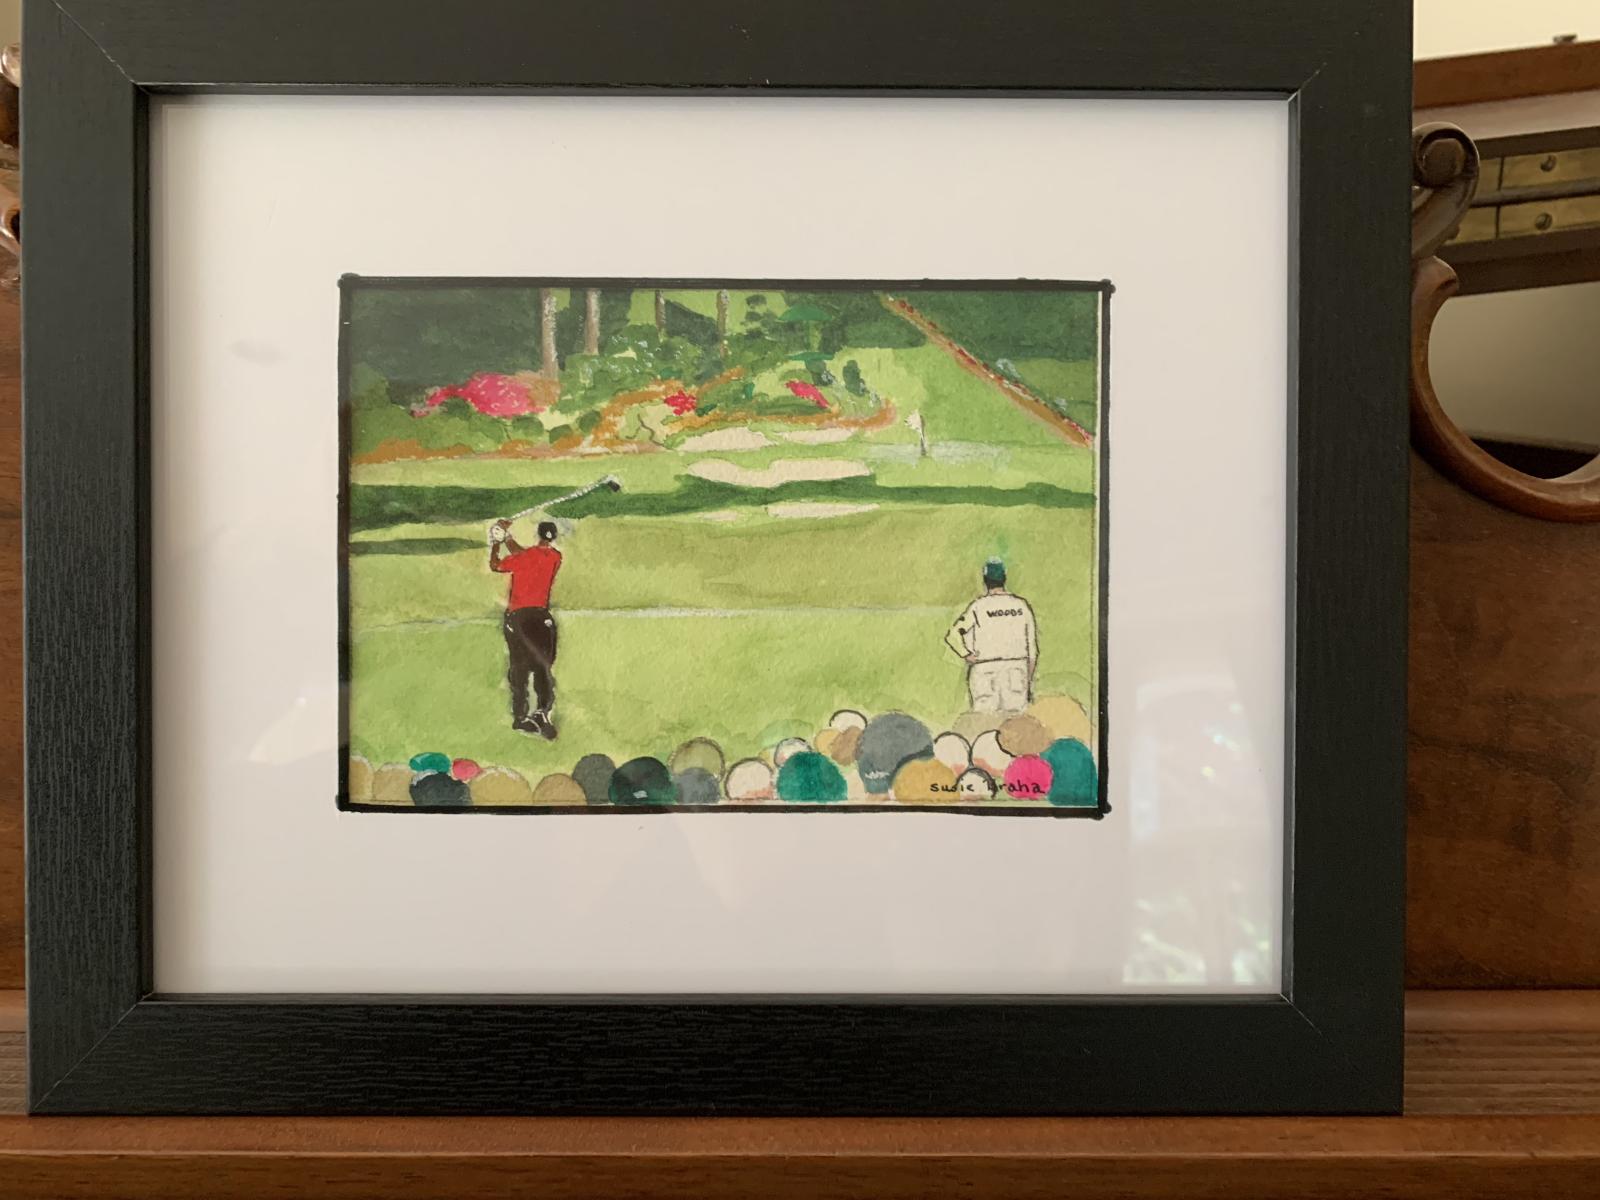 Tiger, Augusta National Golf Club  Mini Watercolor 5"x7" Photo taken from golf.com In Private New Jersey Home (SOLD) : Landscapes : Susan Braha Photography and Fine Art